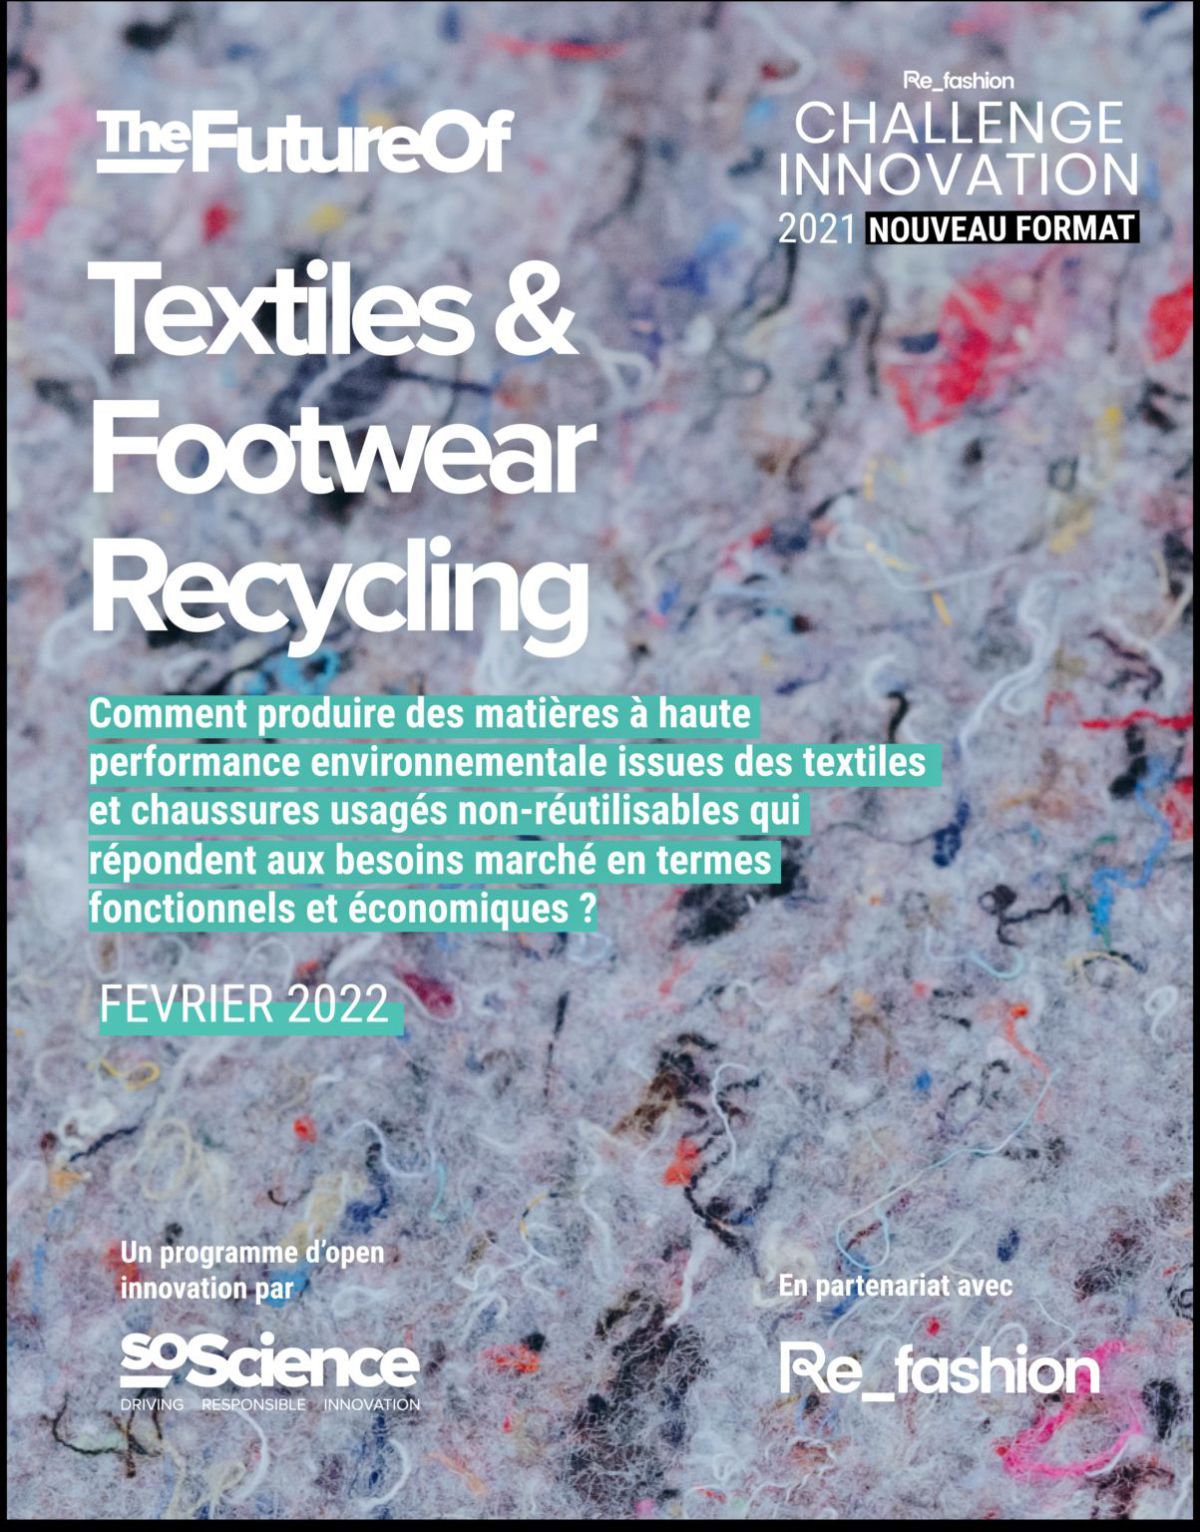 The future of textiles & footwear recycling - recovery